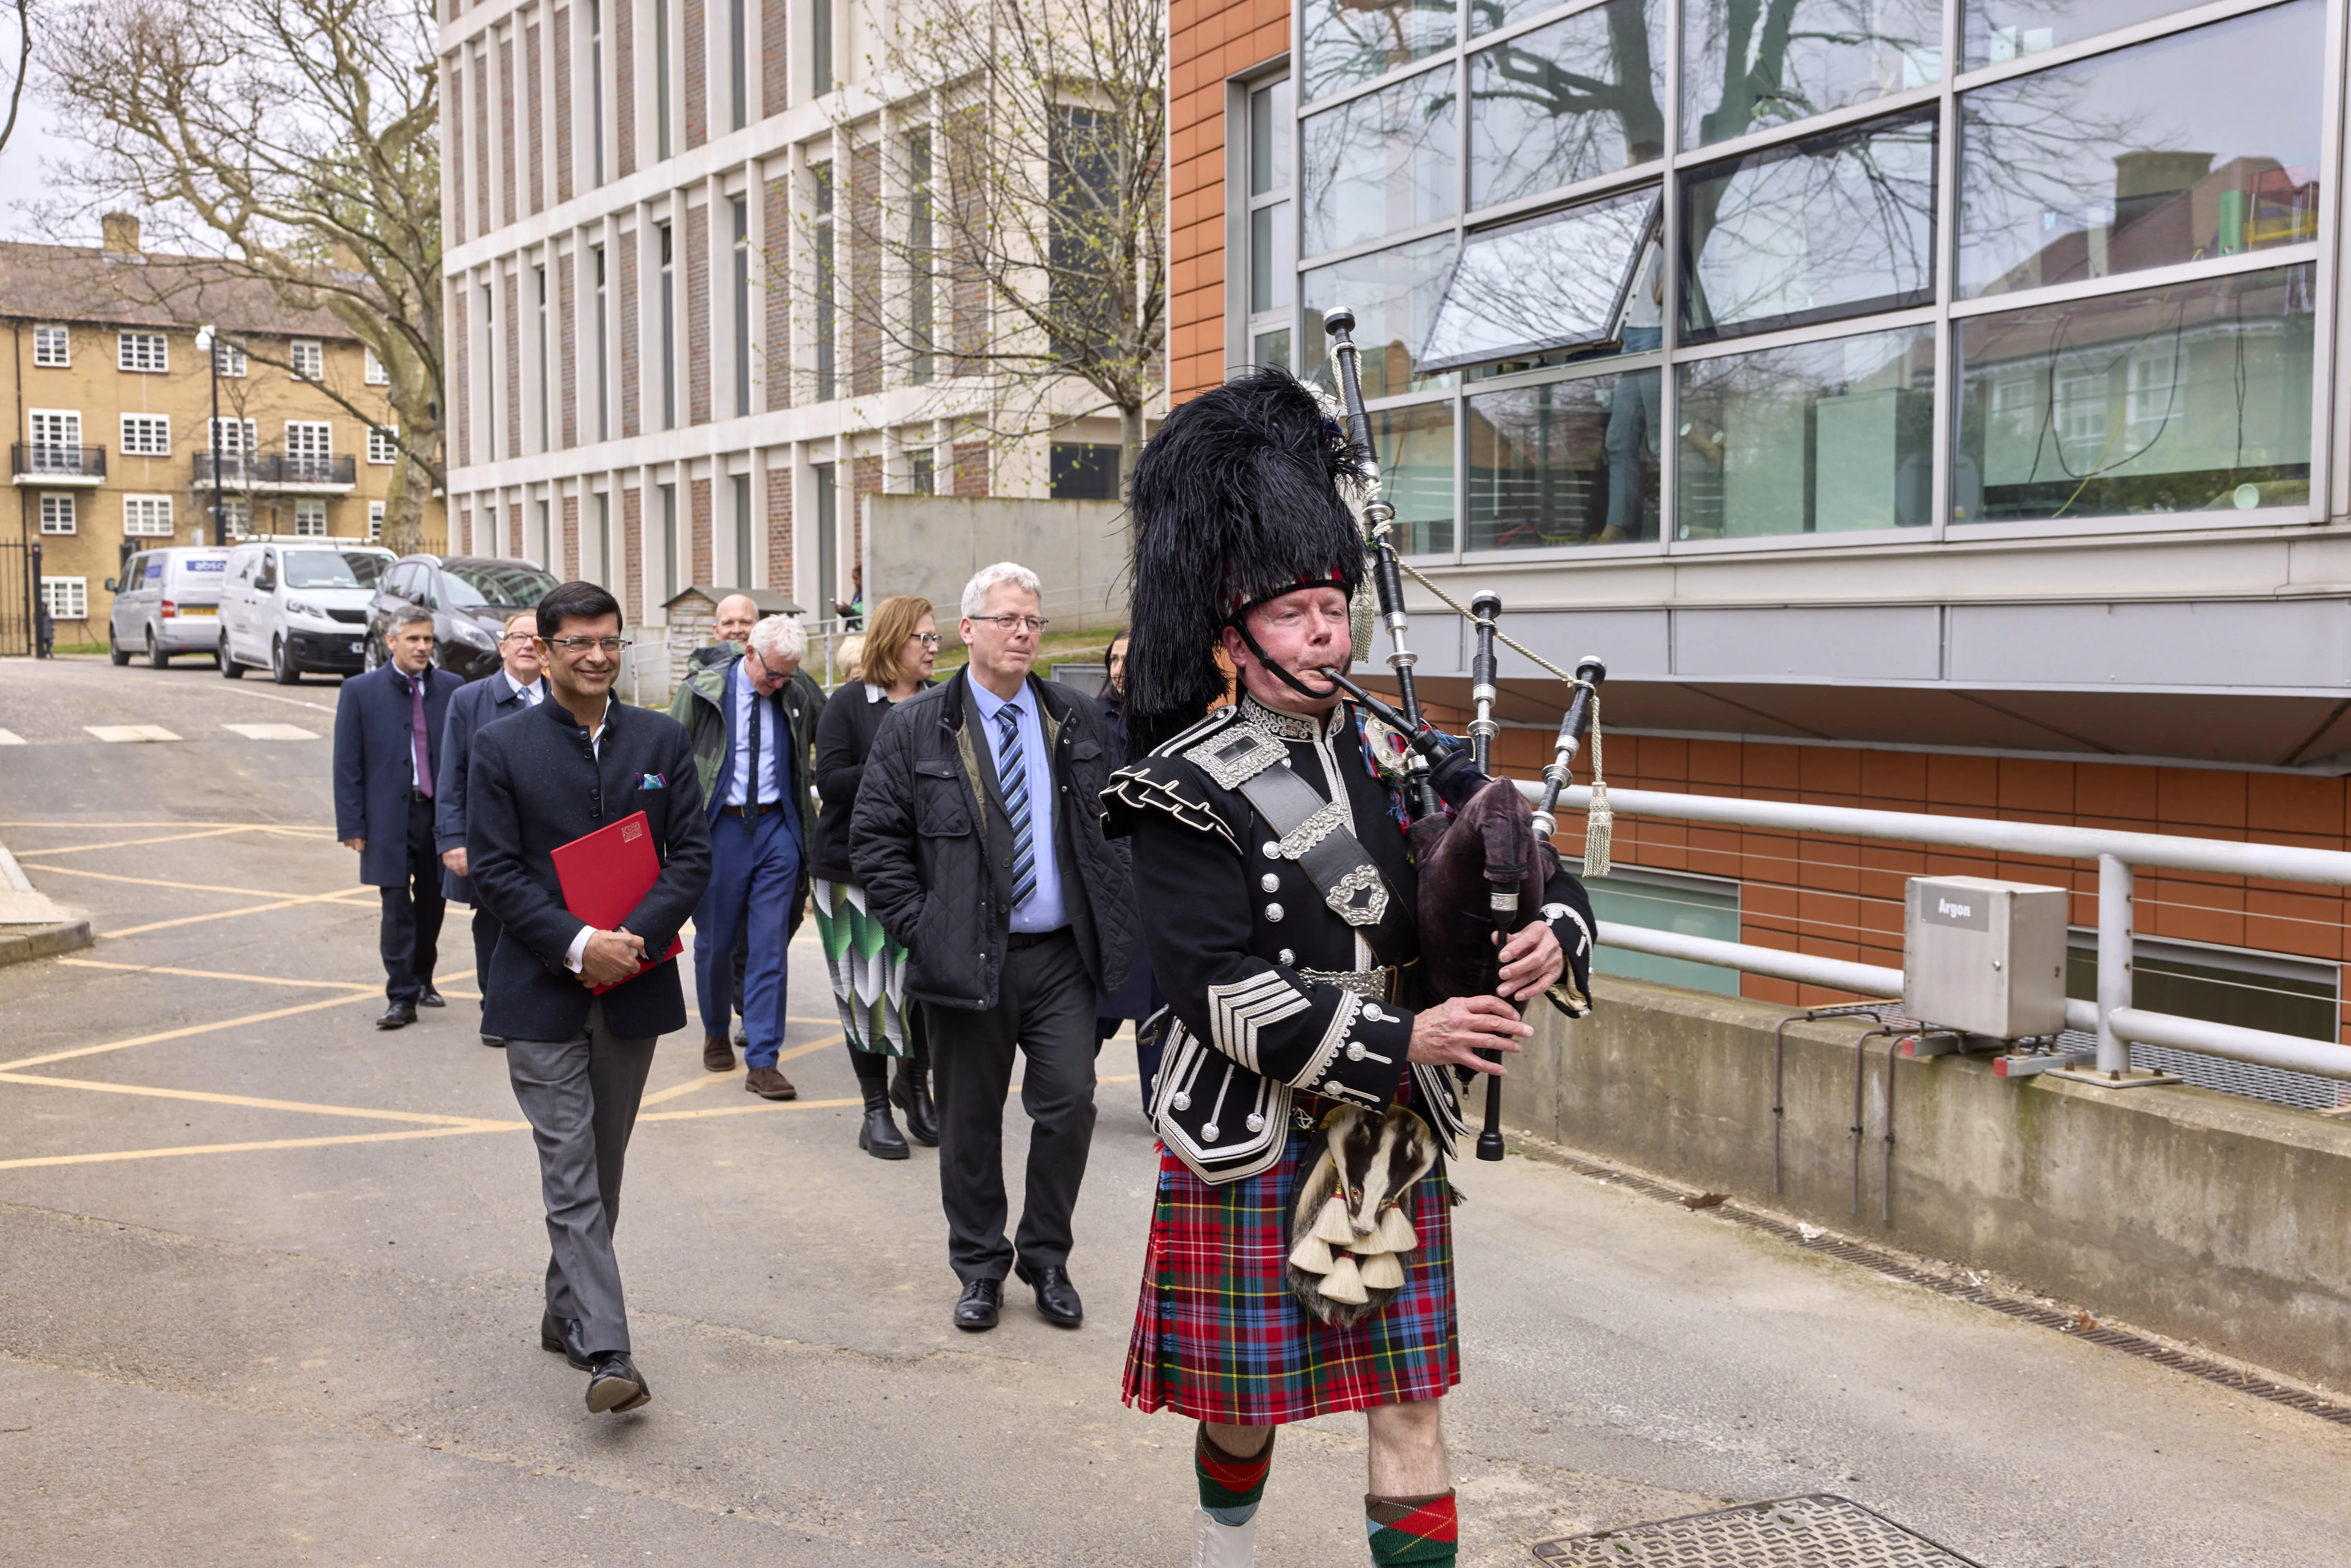 The guests were lead to the ceremony by a piper to honour McAlpine's Scottish heritage.